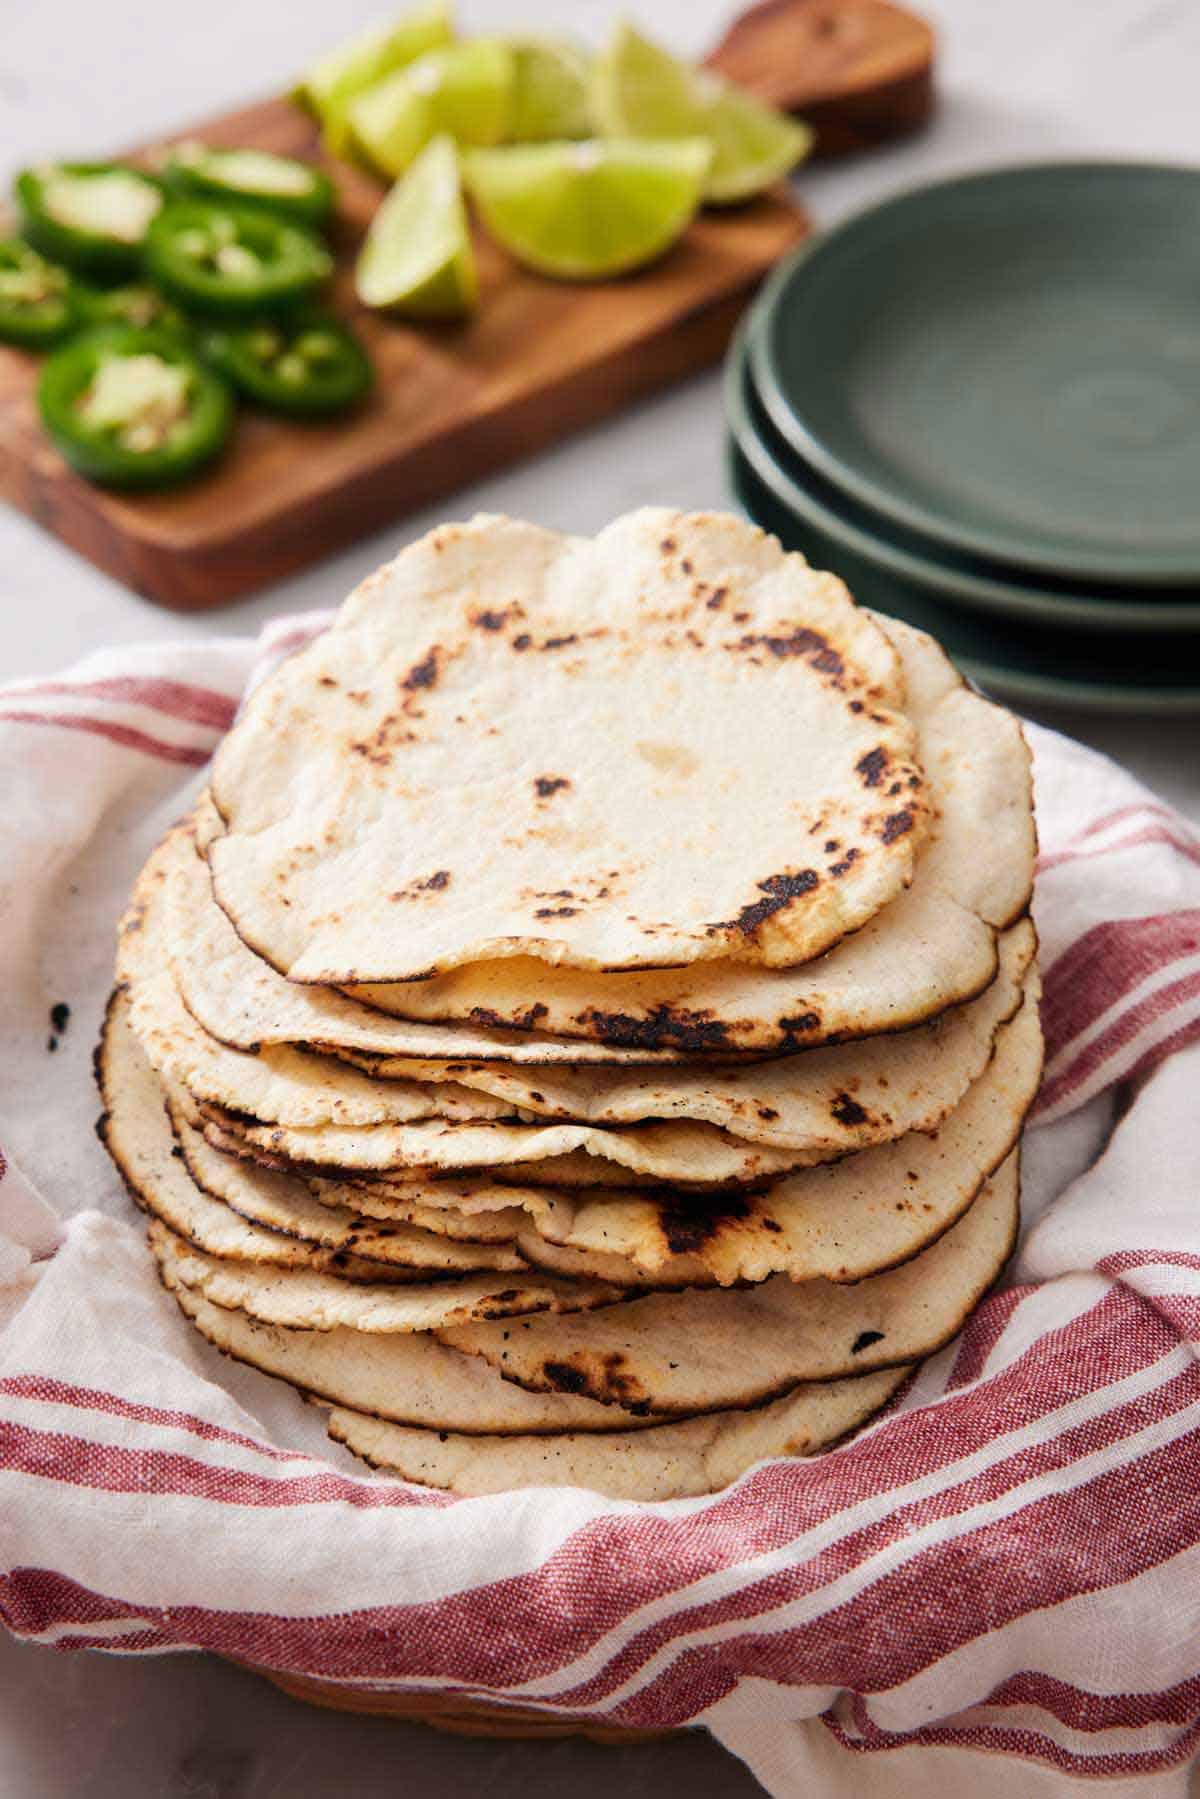 A stack of corn tortillas on a linen napkin with a stack of plate in the background along with sliced jalapenos and limes.